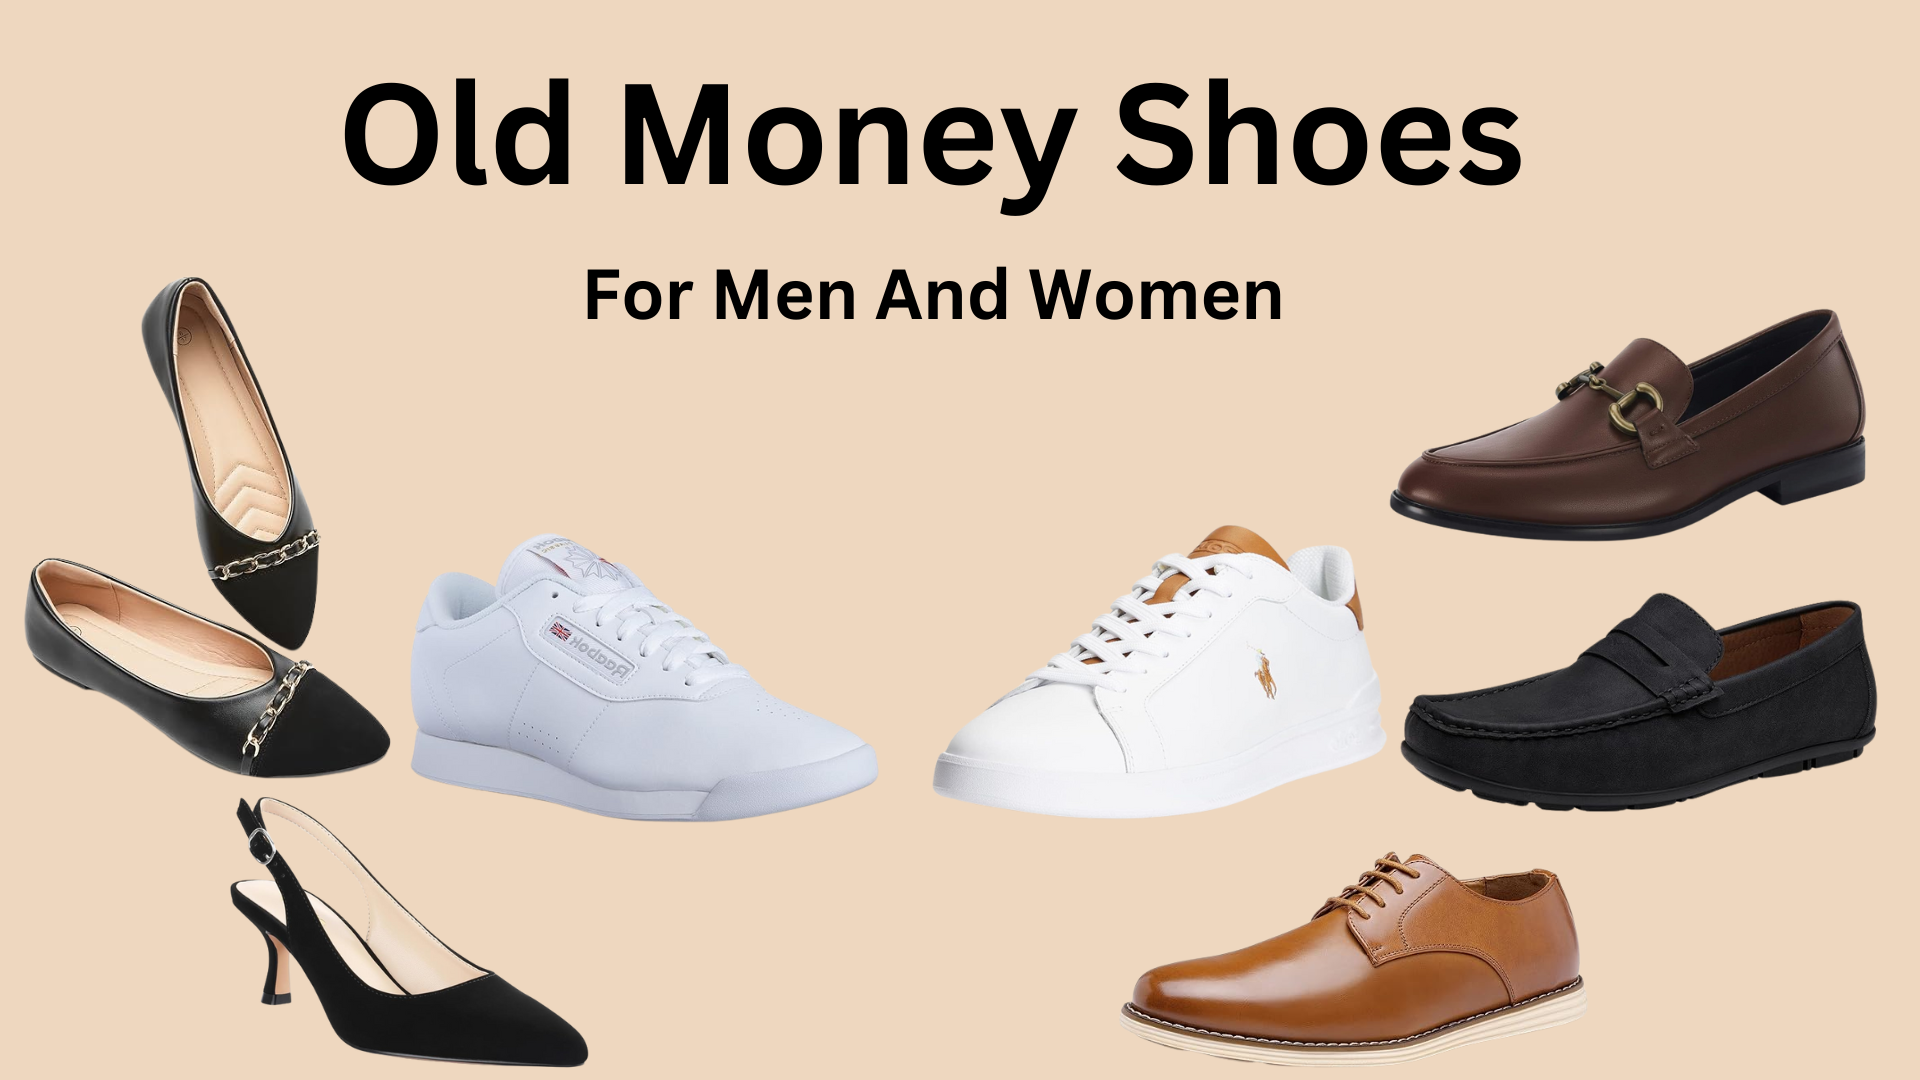 10 Best Old Money Shoes For Men and Women - changestry.com